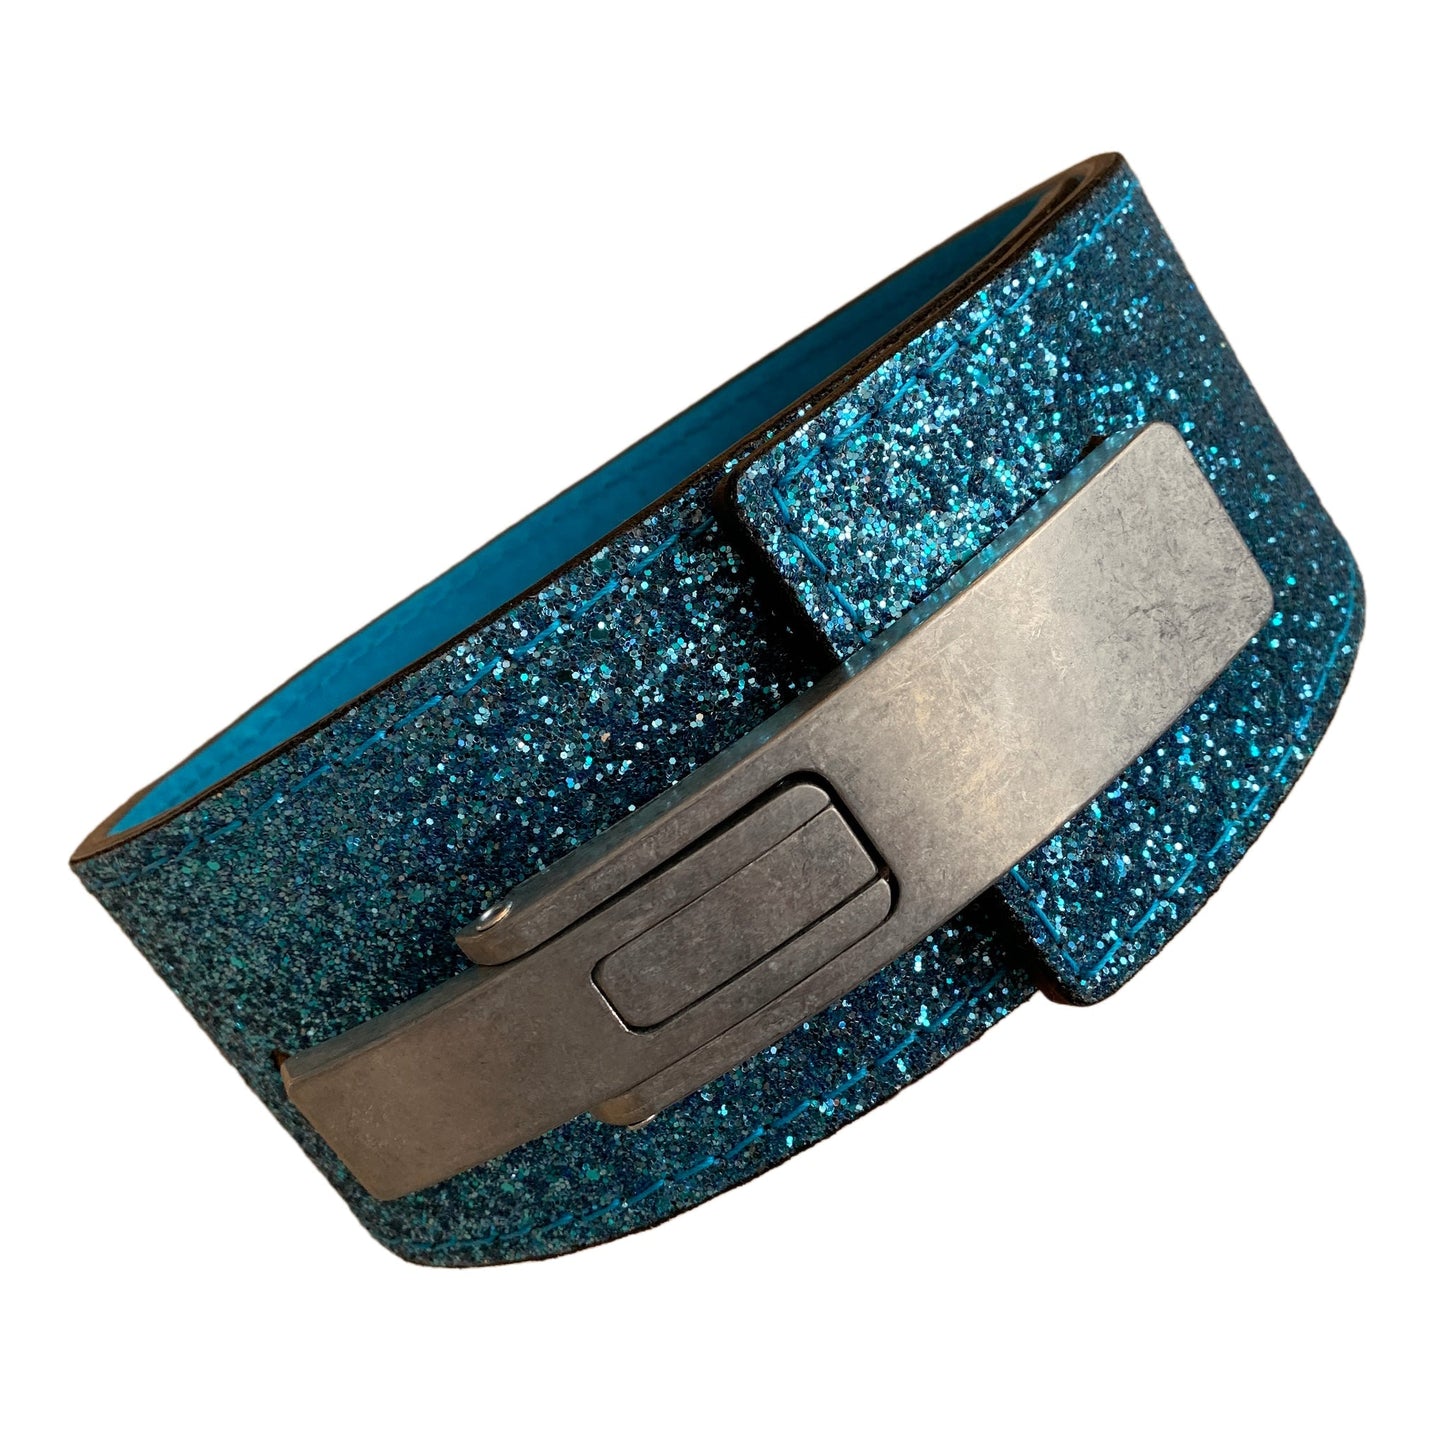 Pioneer Fitness Powerlifting Lever Belt – 13mm thick – 3" wide (Sparkle)